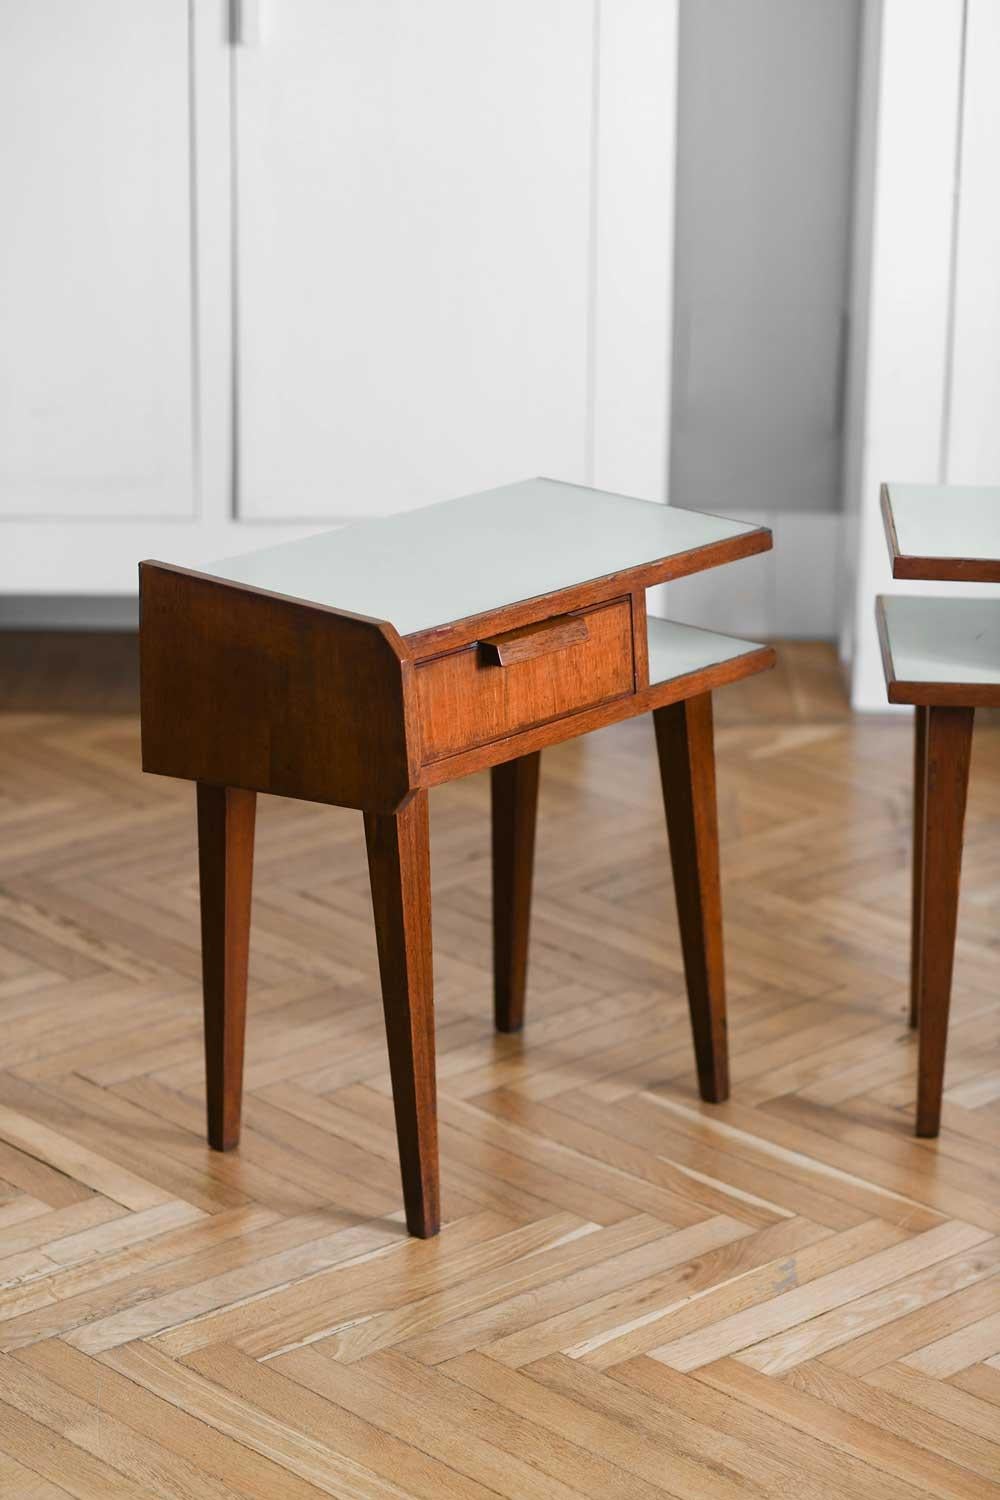 Mid-20th Century Pair of 1950s Bedside Tables Made of Wood with Formica Shelves